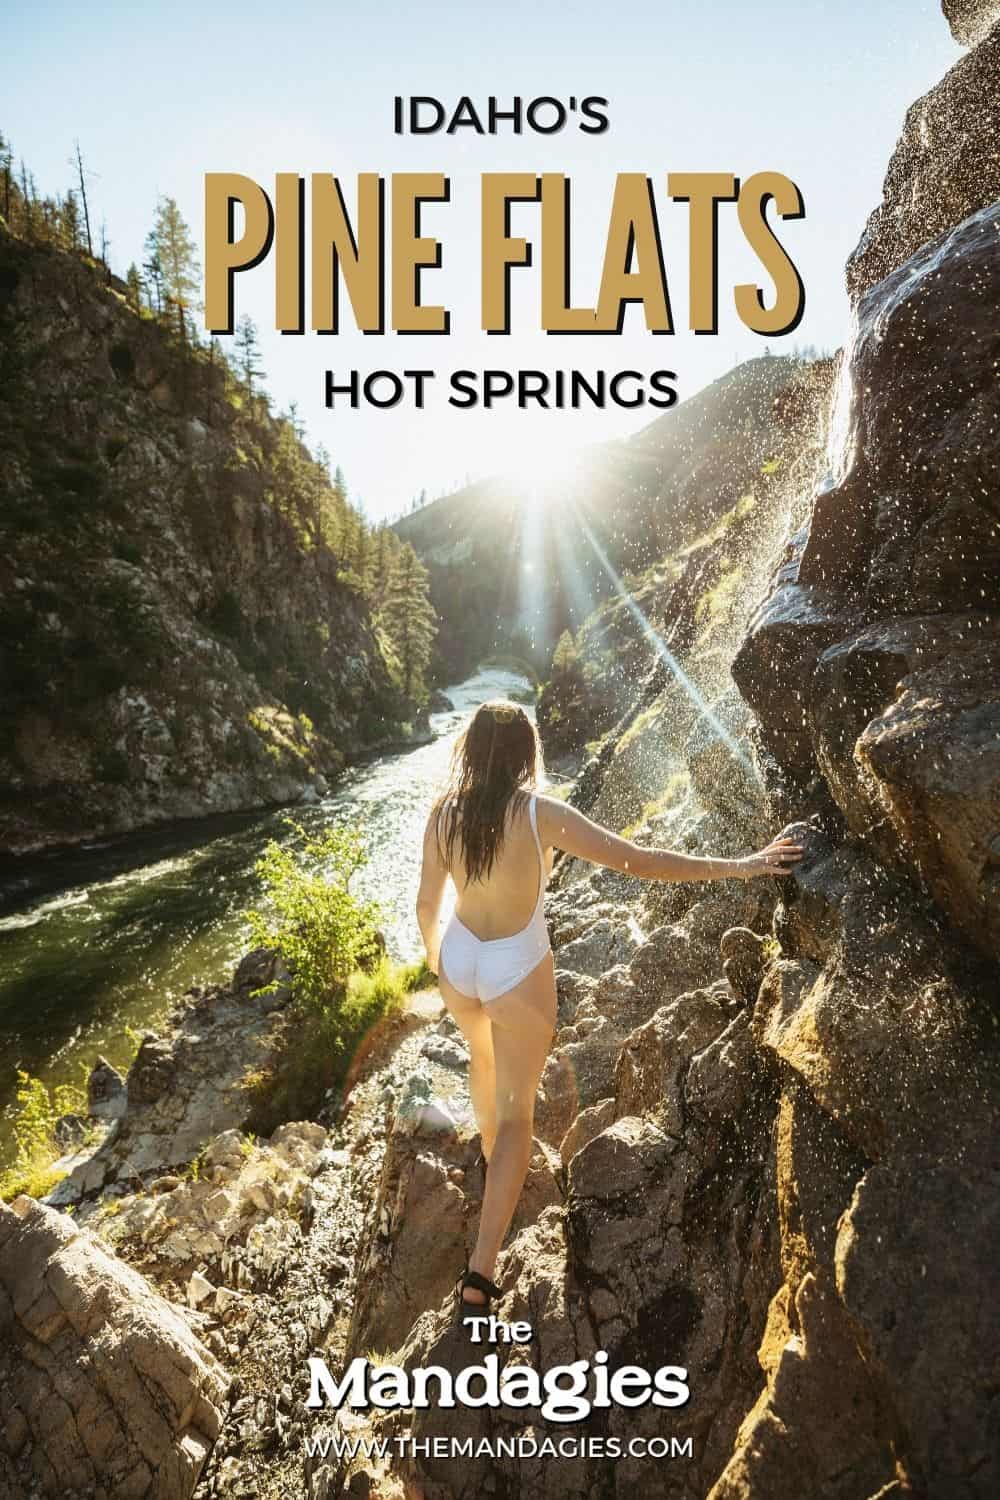 Pine Flats Hot Spring is perched up on the cliffside of the Payette River in Central Idaho. This unique hot springs in Idaho (including a hot waterfall!) has several pools and scenic views and we're sharing everything for your next visit here! #idaho #hotsprings #idahohotsprings #hotspring #boise #centralidaho #winter #payetteriver #travel #idahotravel #adventure #USAtravel #McCallIdaho #photography #sunset #mountains